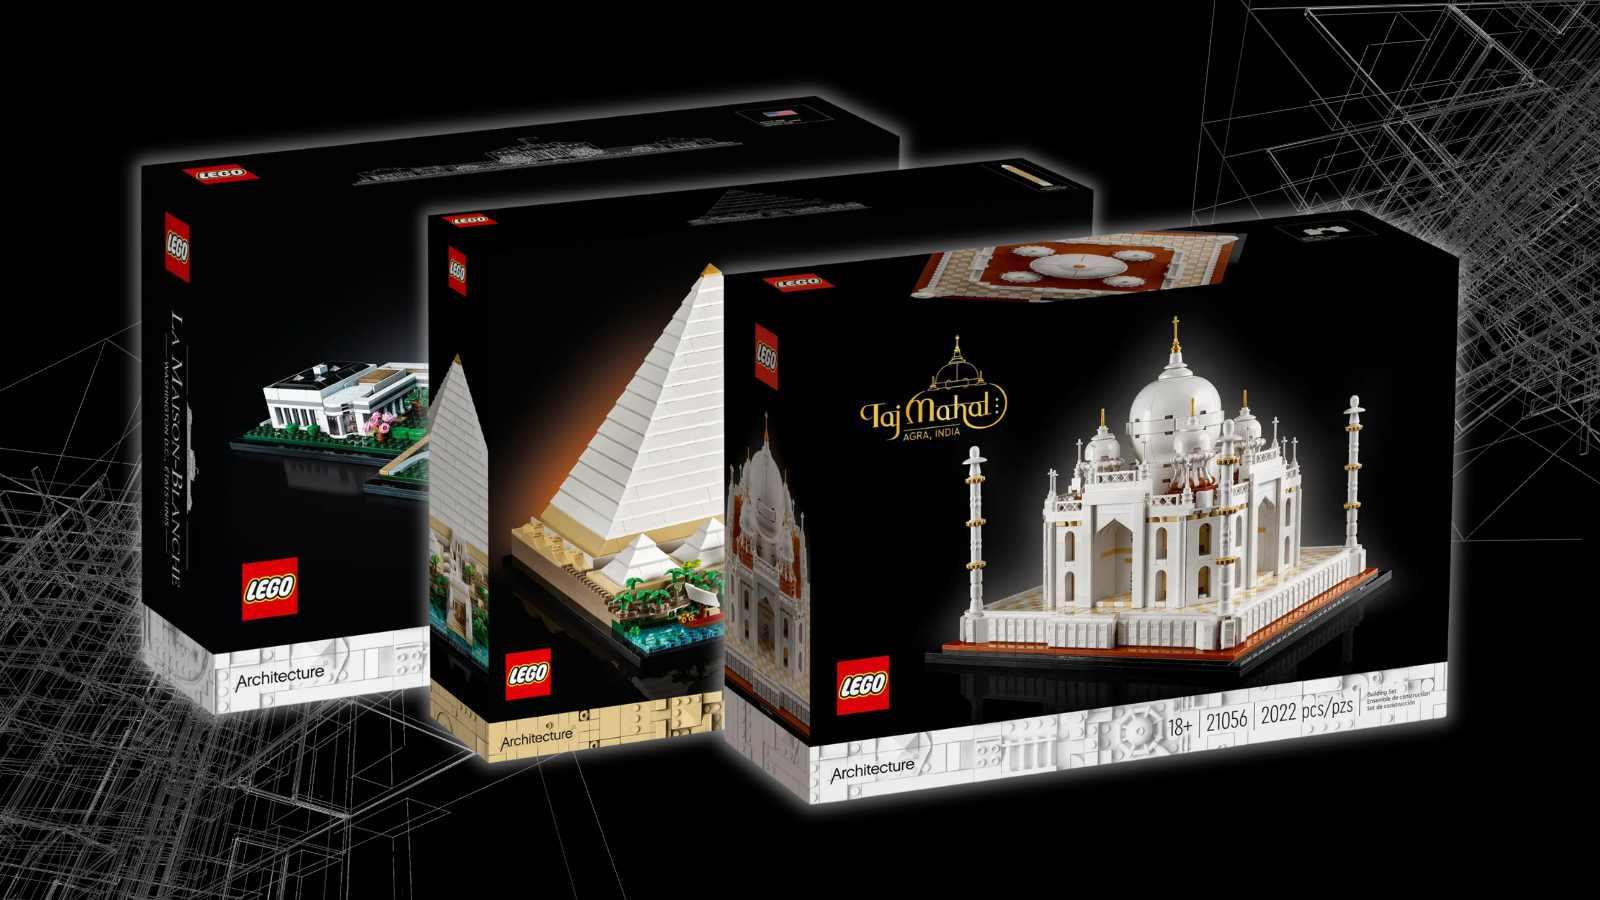 LEGO Architecture sets for adults aged 18 and up on black background with building graphics